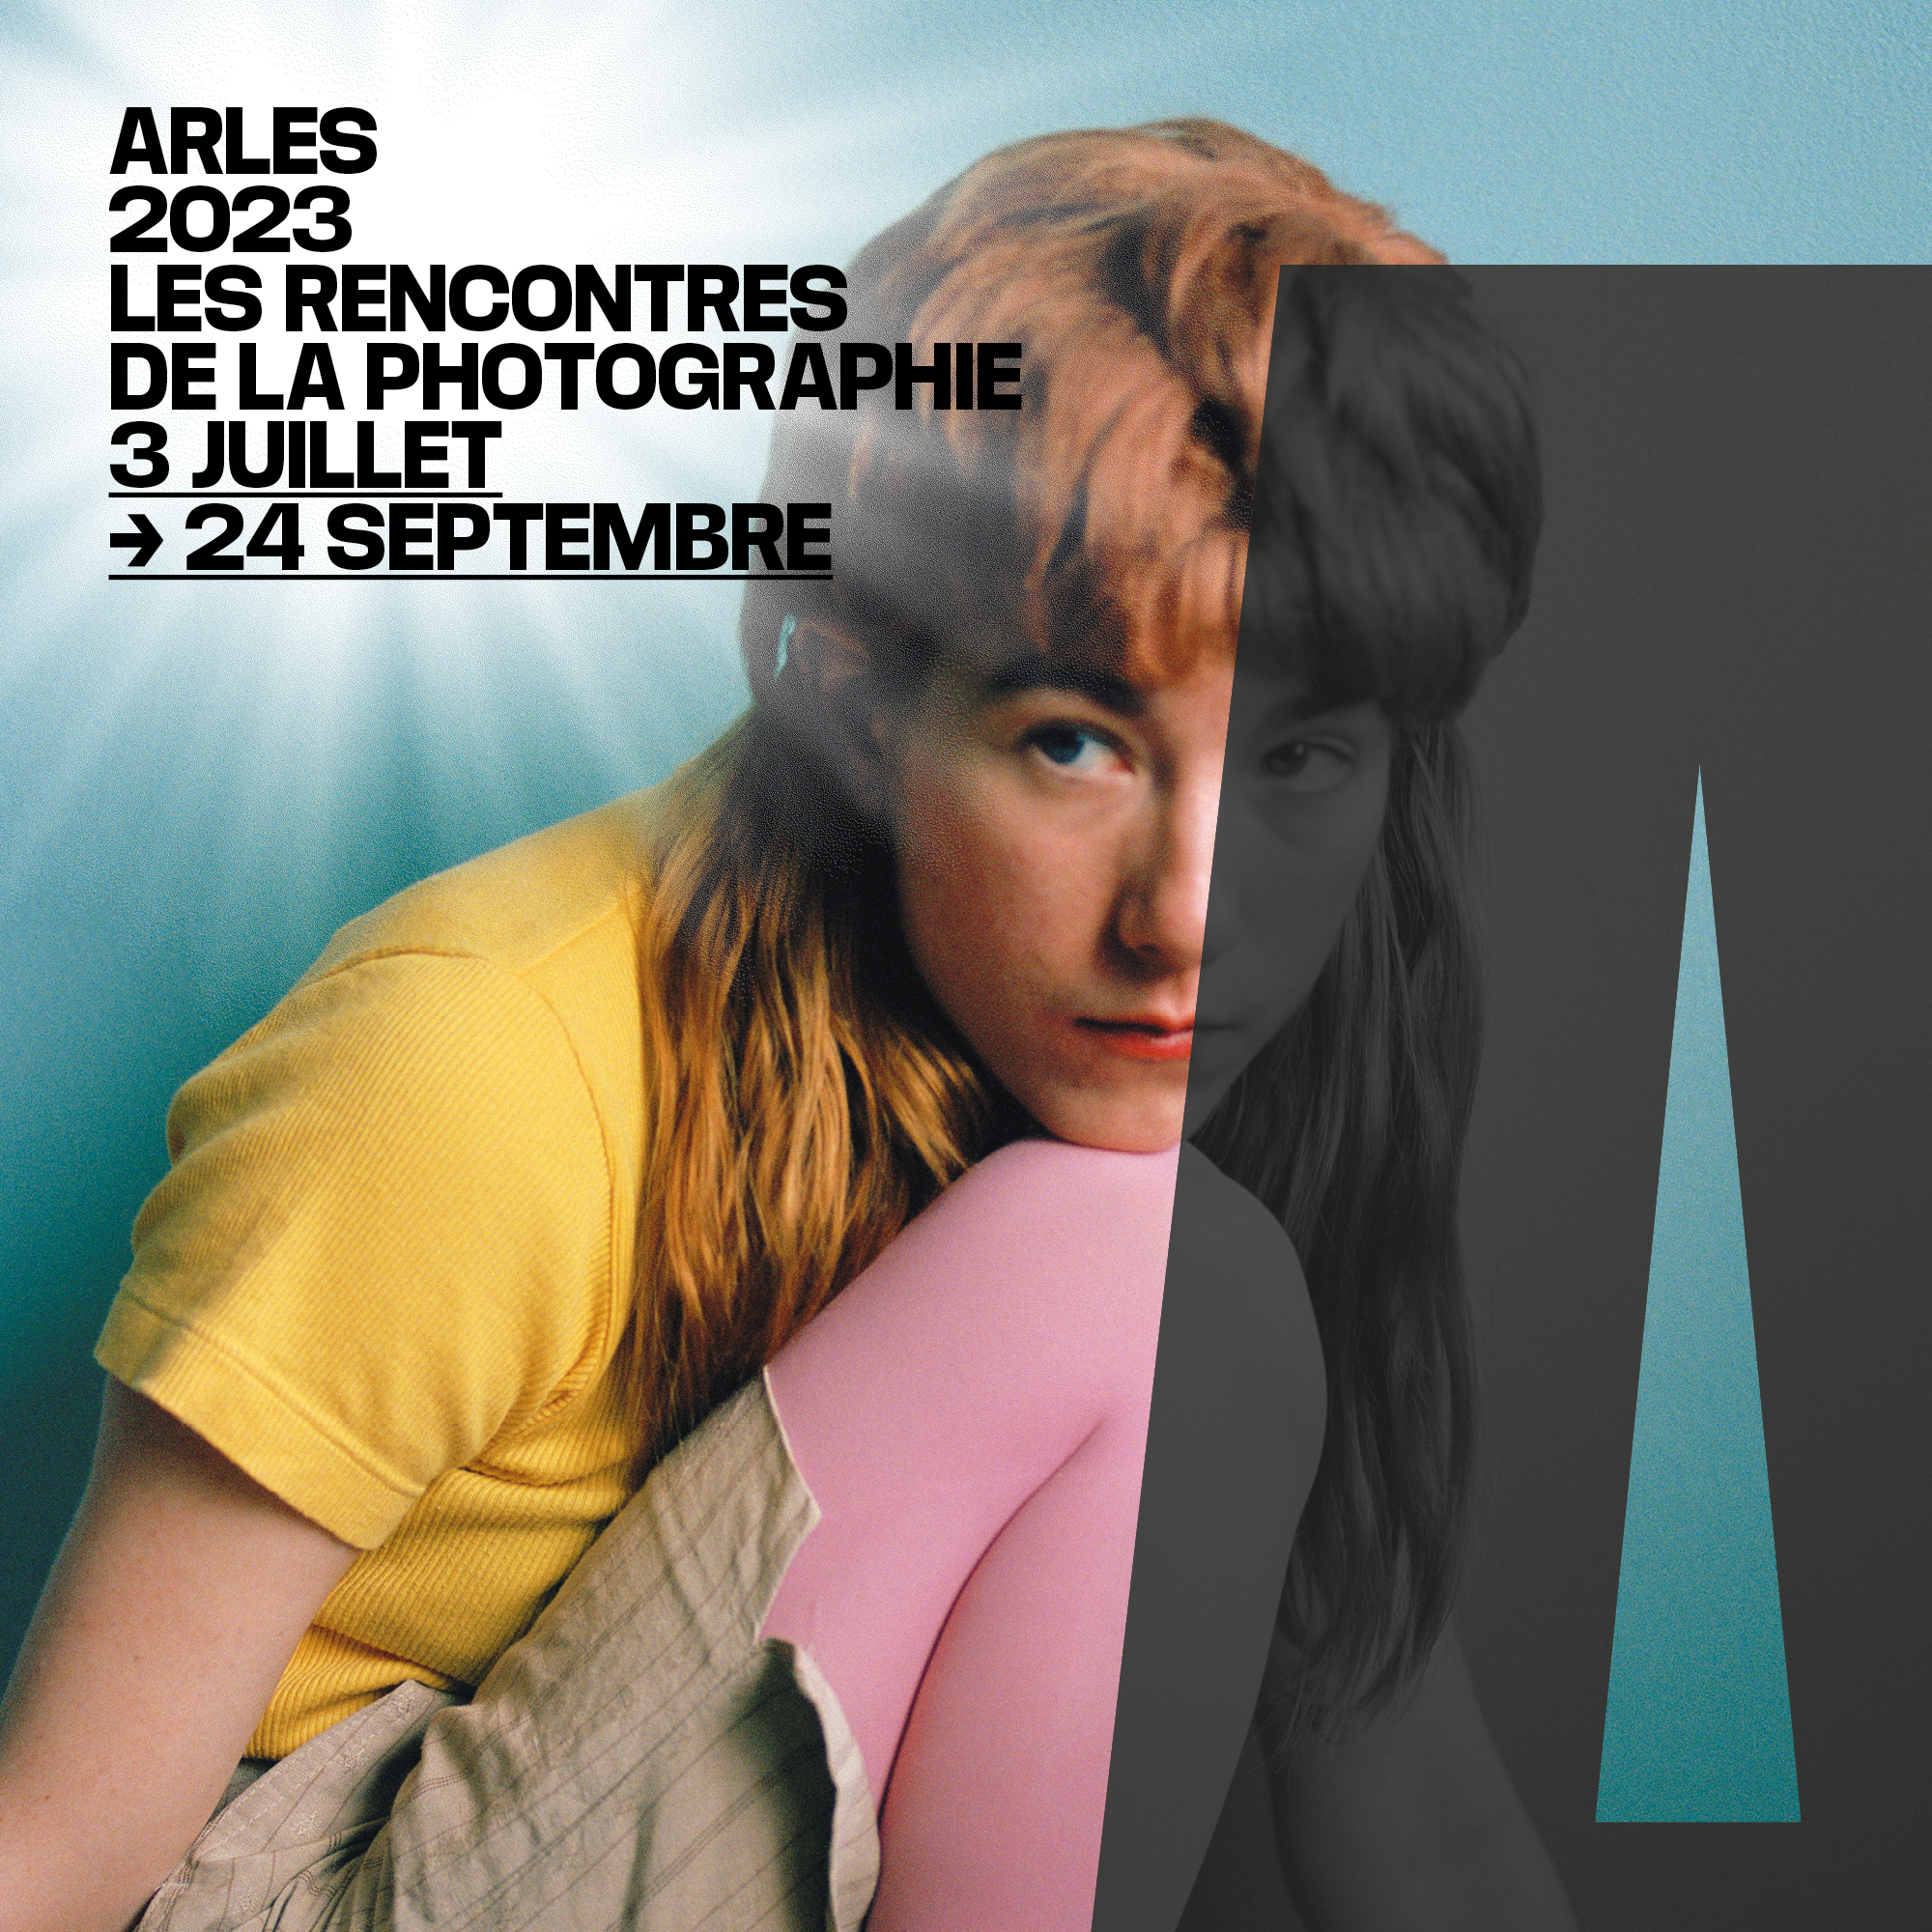 DISCOVER THE POSTER OF THE RENCONTRES D'ARLES 2023 !